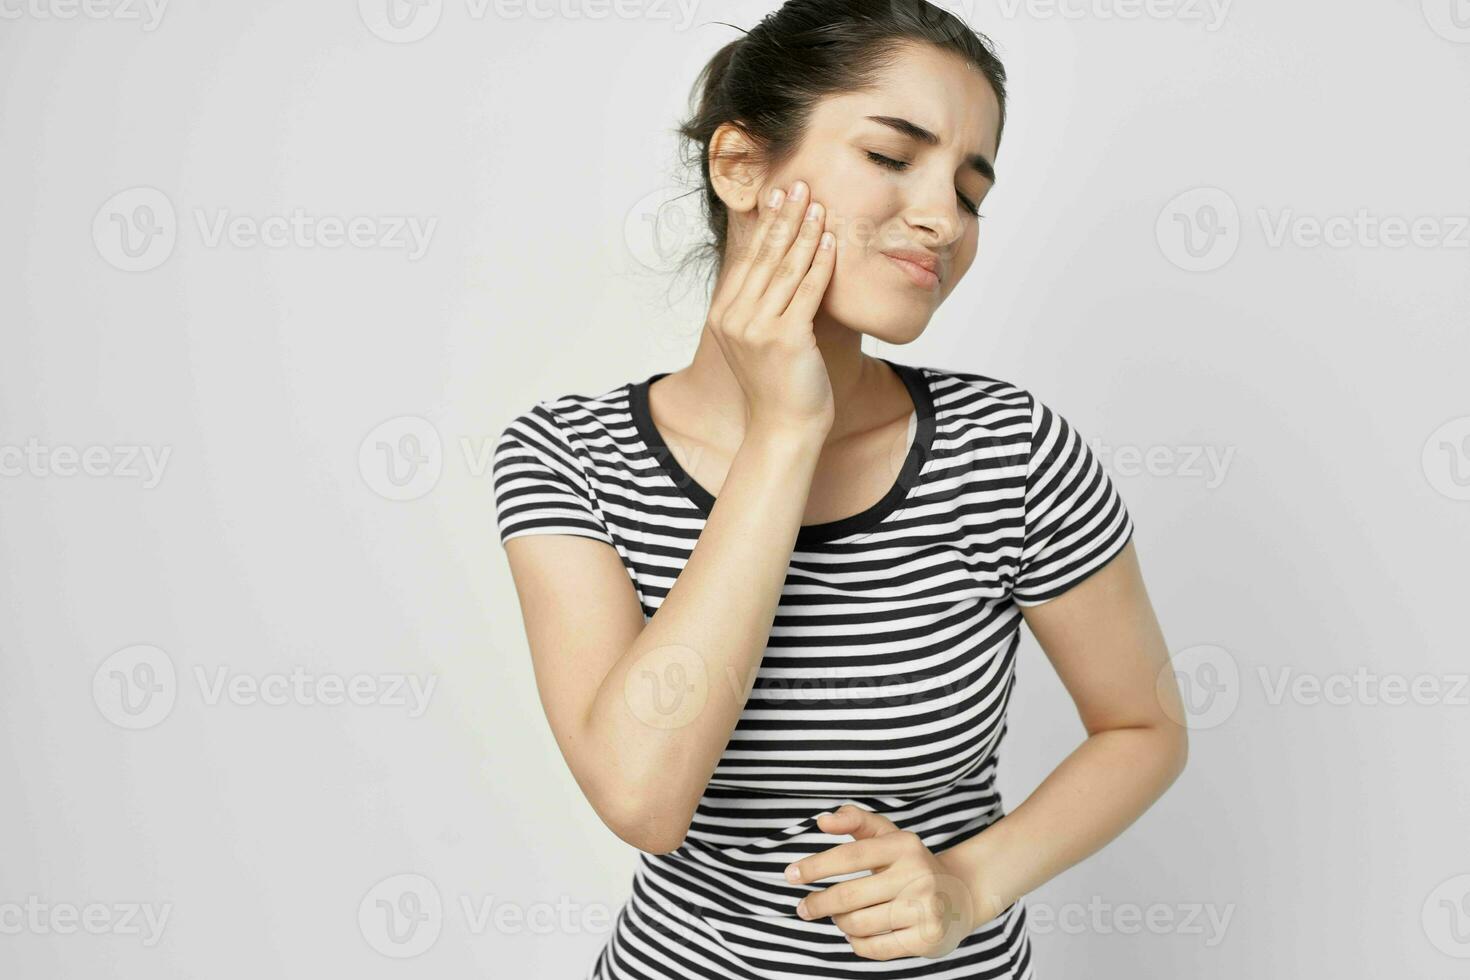 emotional woman dentistry health problems discomfort light background photo